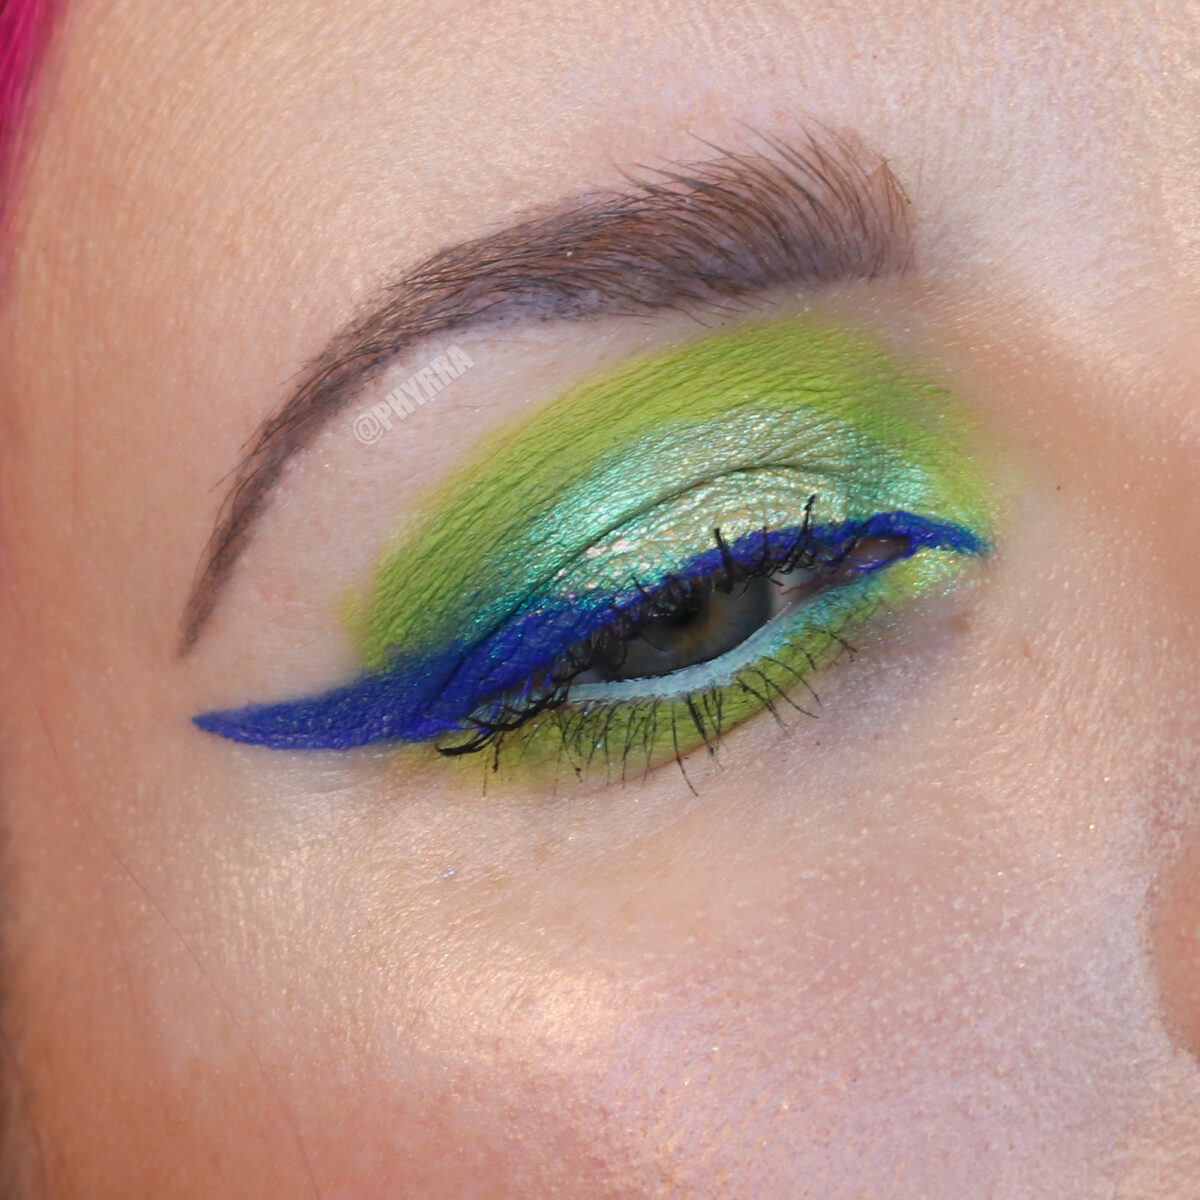 Half Magic Beauty Off the Deep End liner, We are Aliens base, and Devinah Fairy Fire